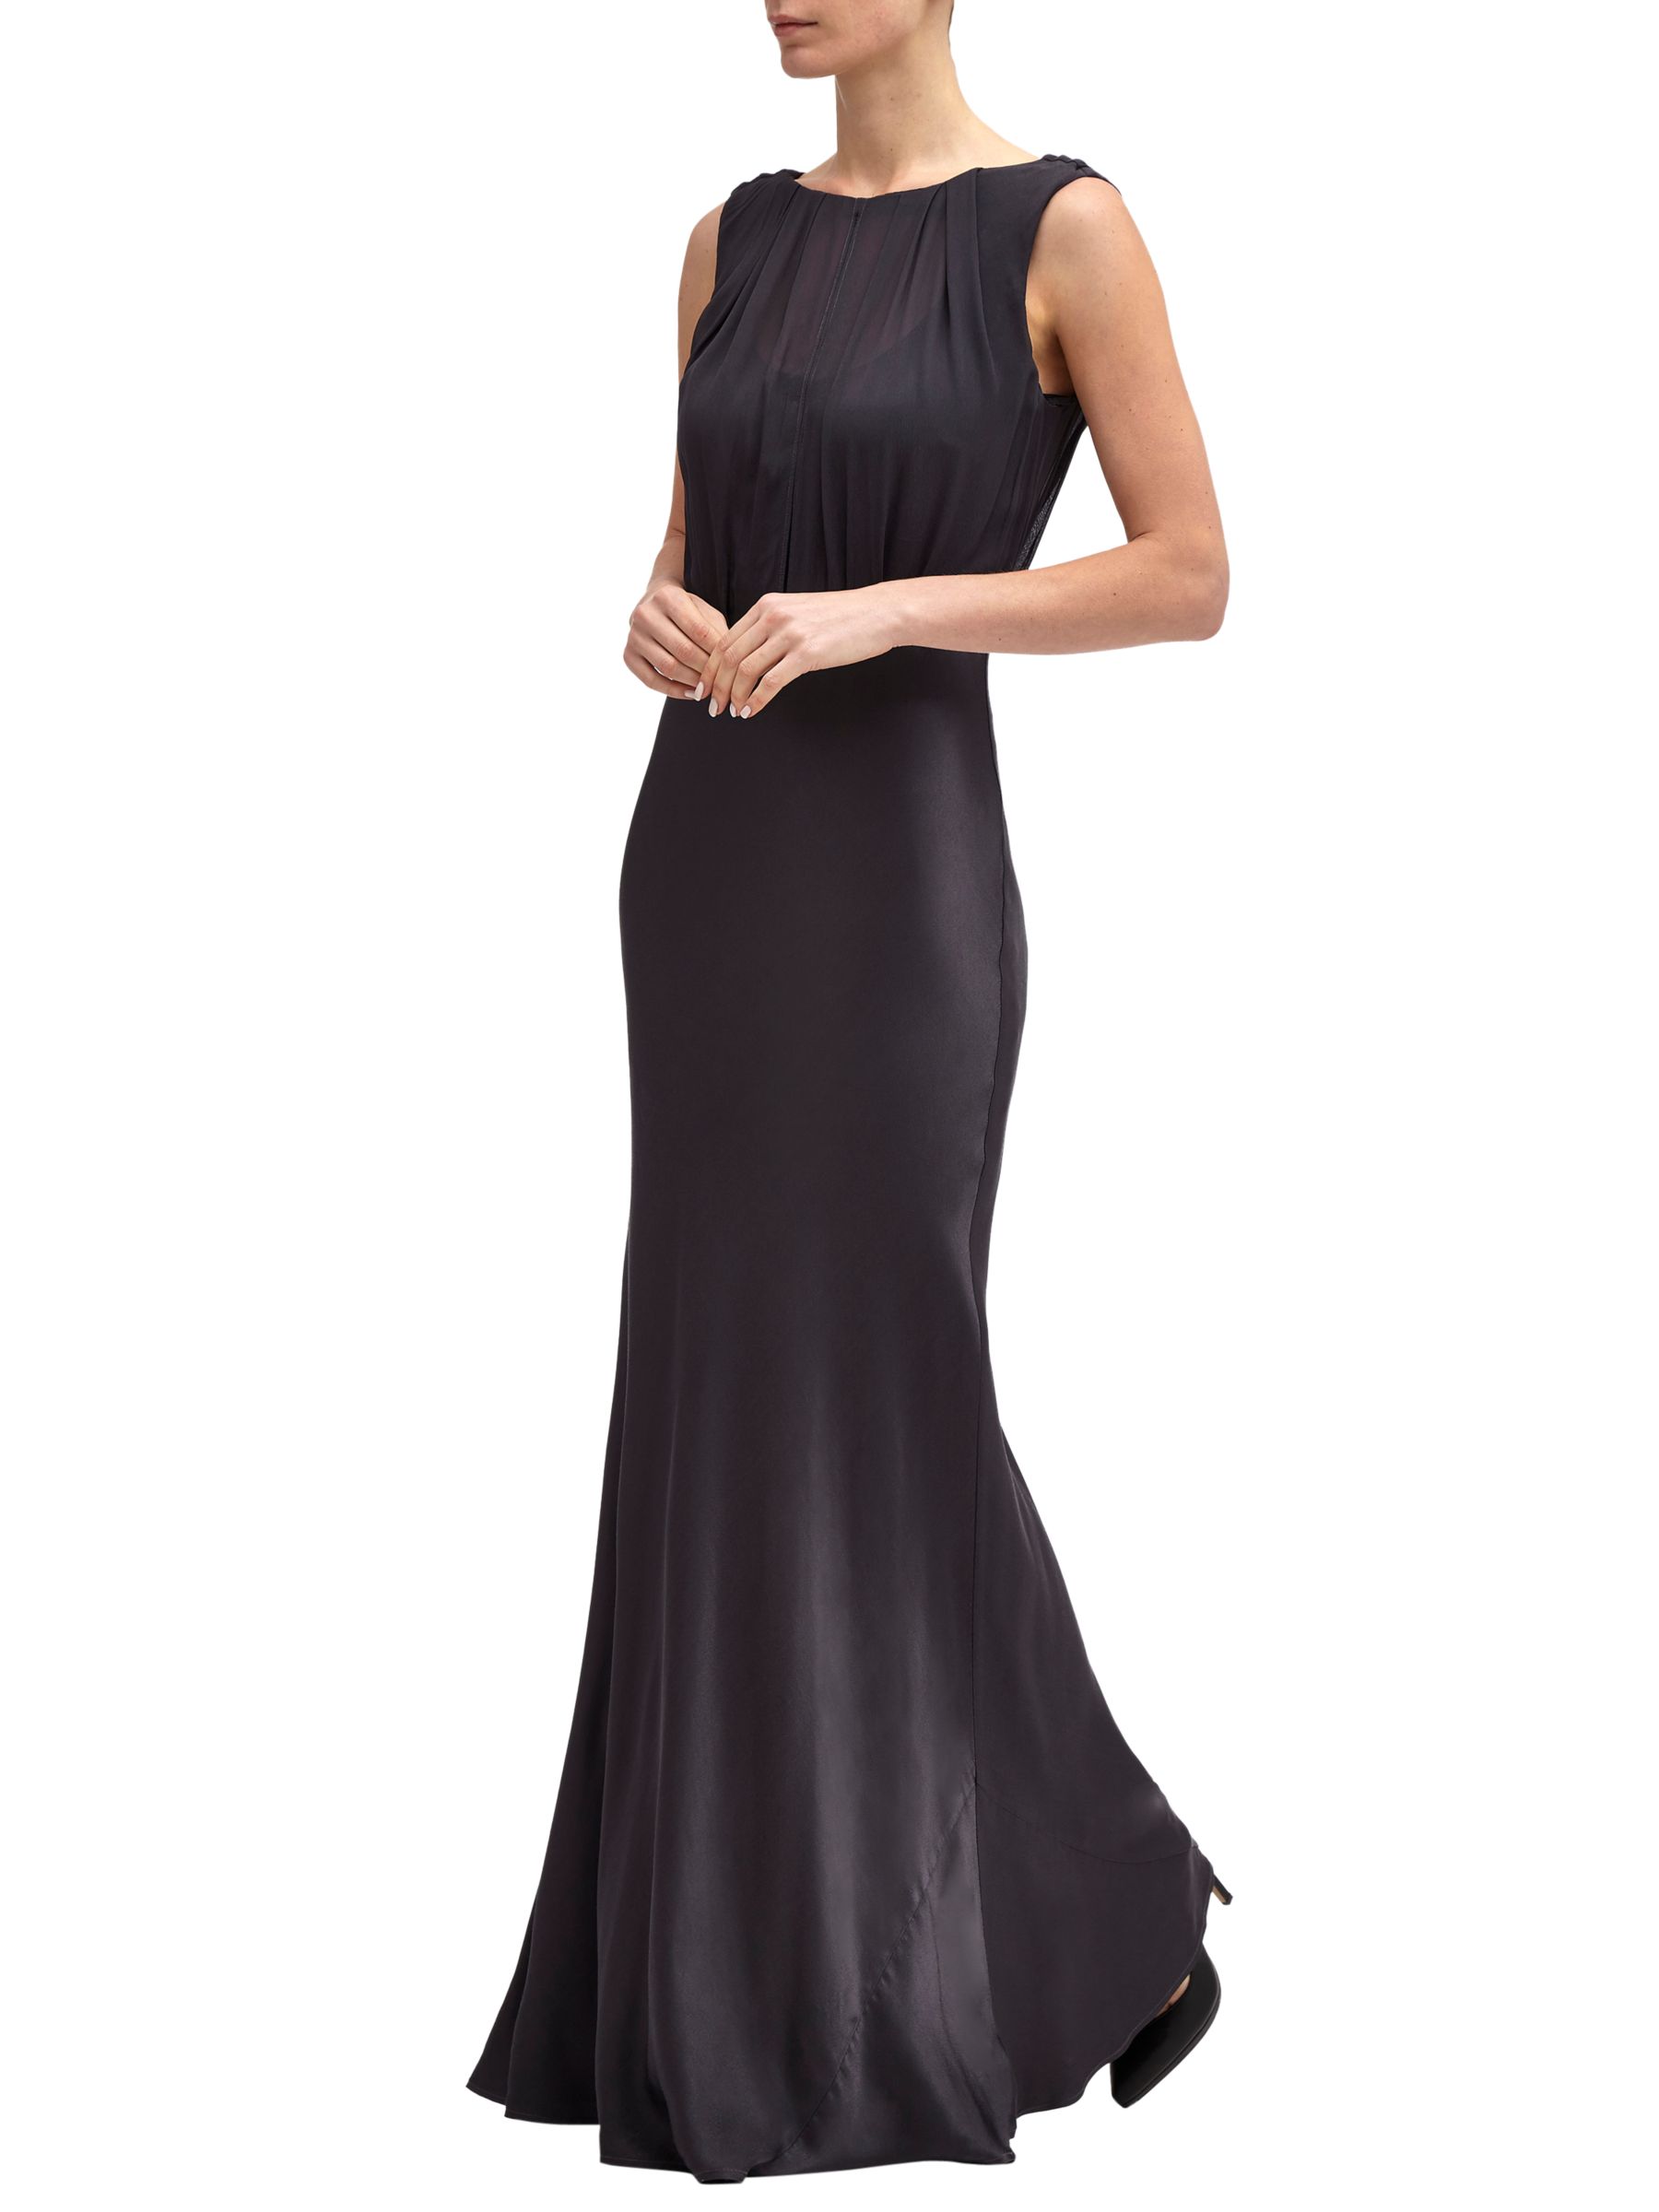 Ghost Hollywood Claudia Dress, Charcoal at John Lewis & Partners